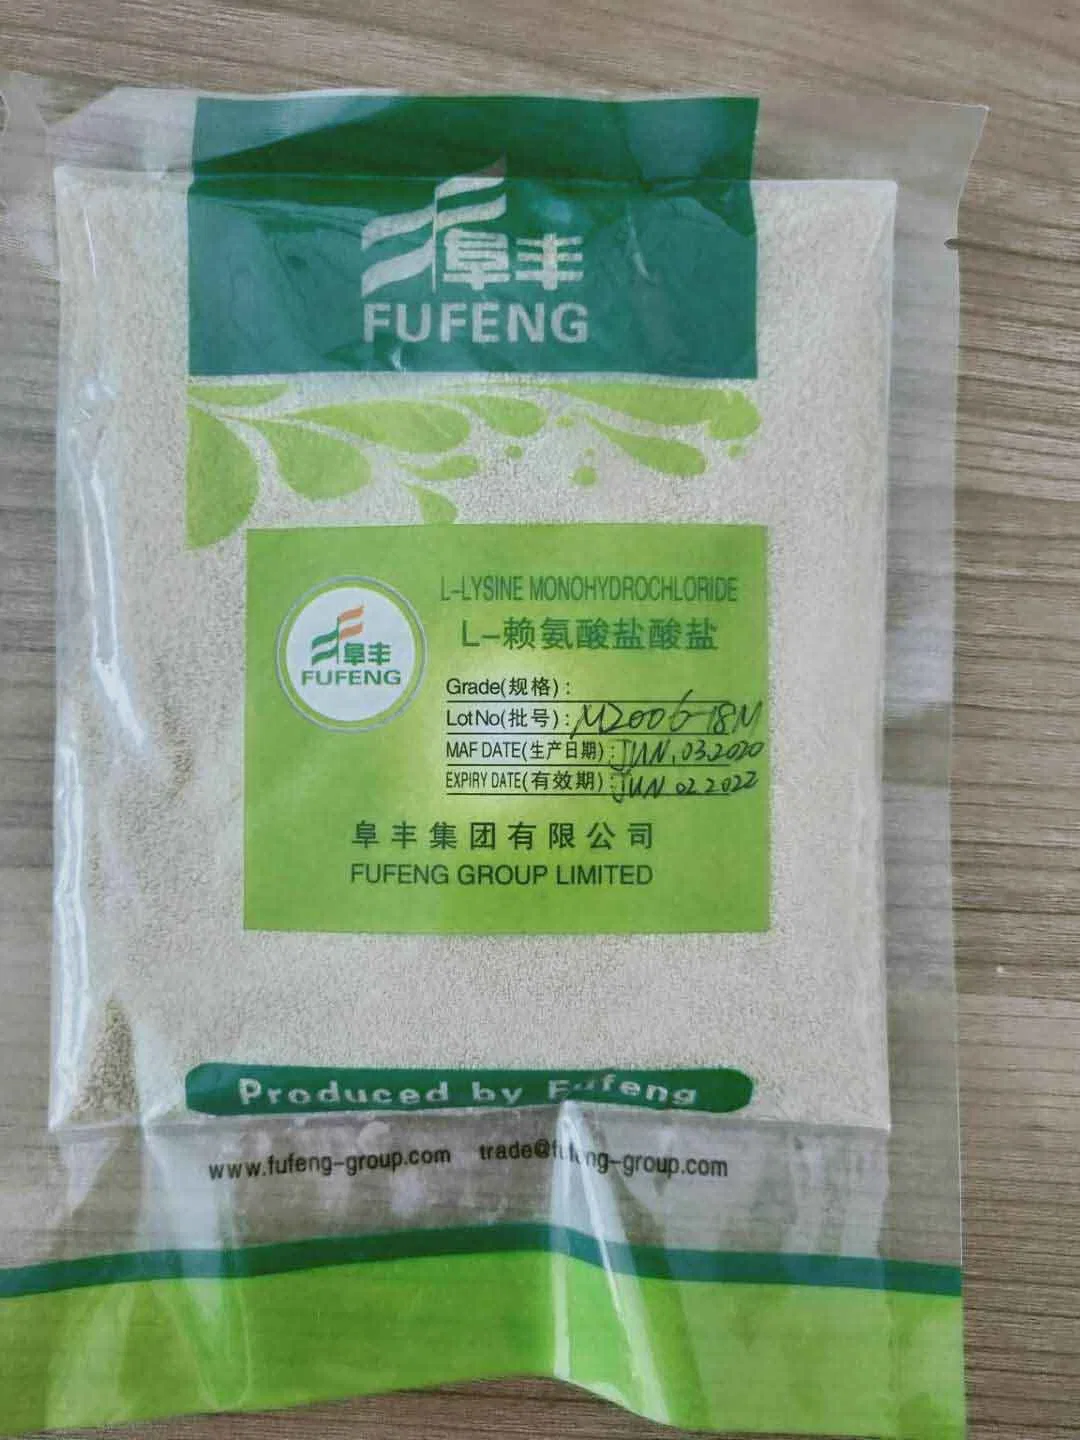 White Powder L-Lysine HCl 98.5% Feed Grade with Famiqs